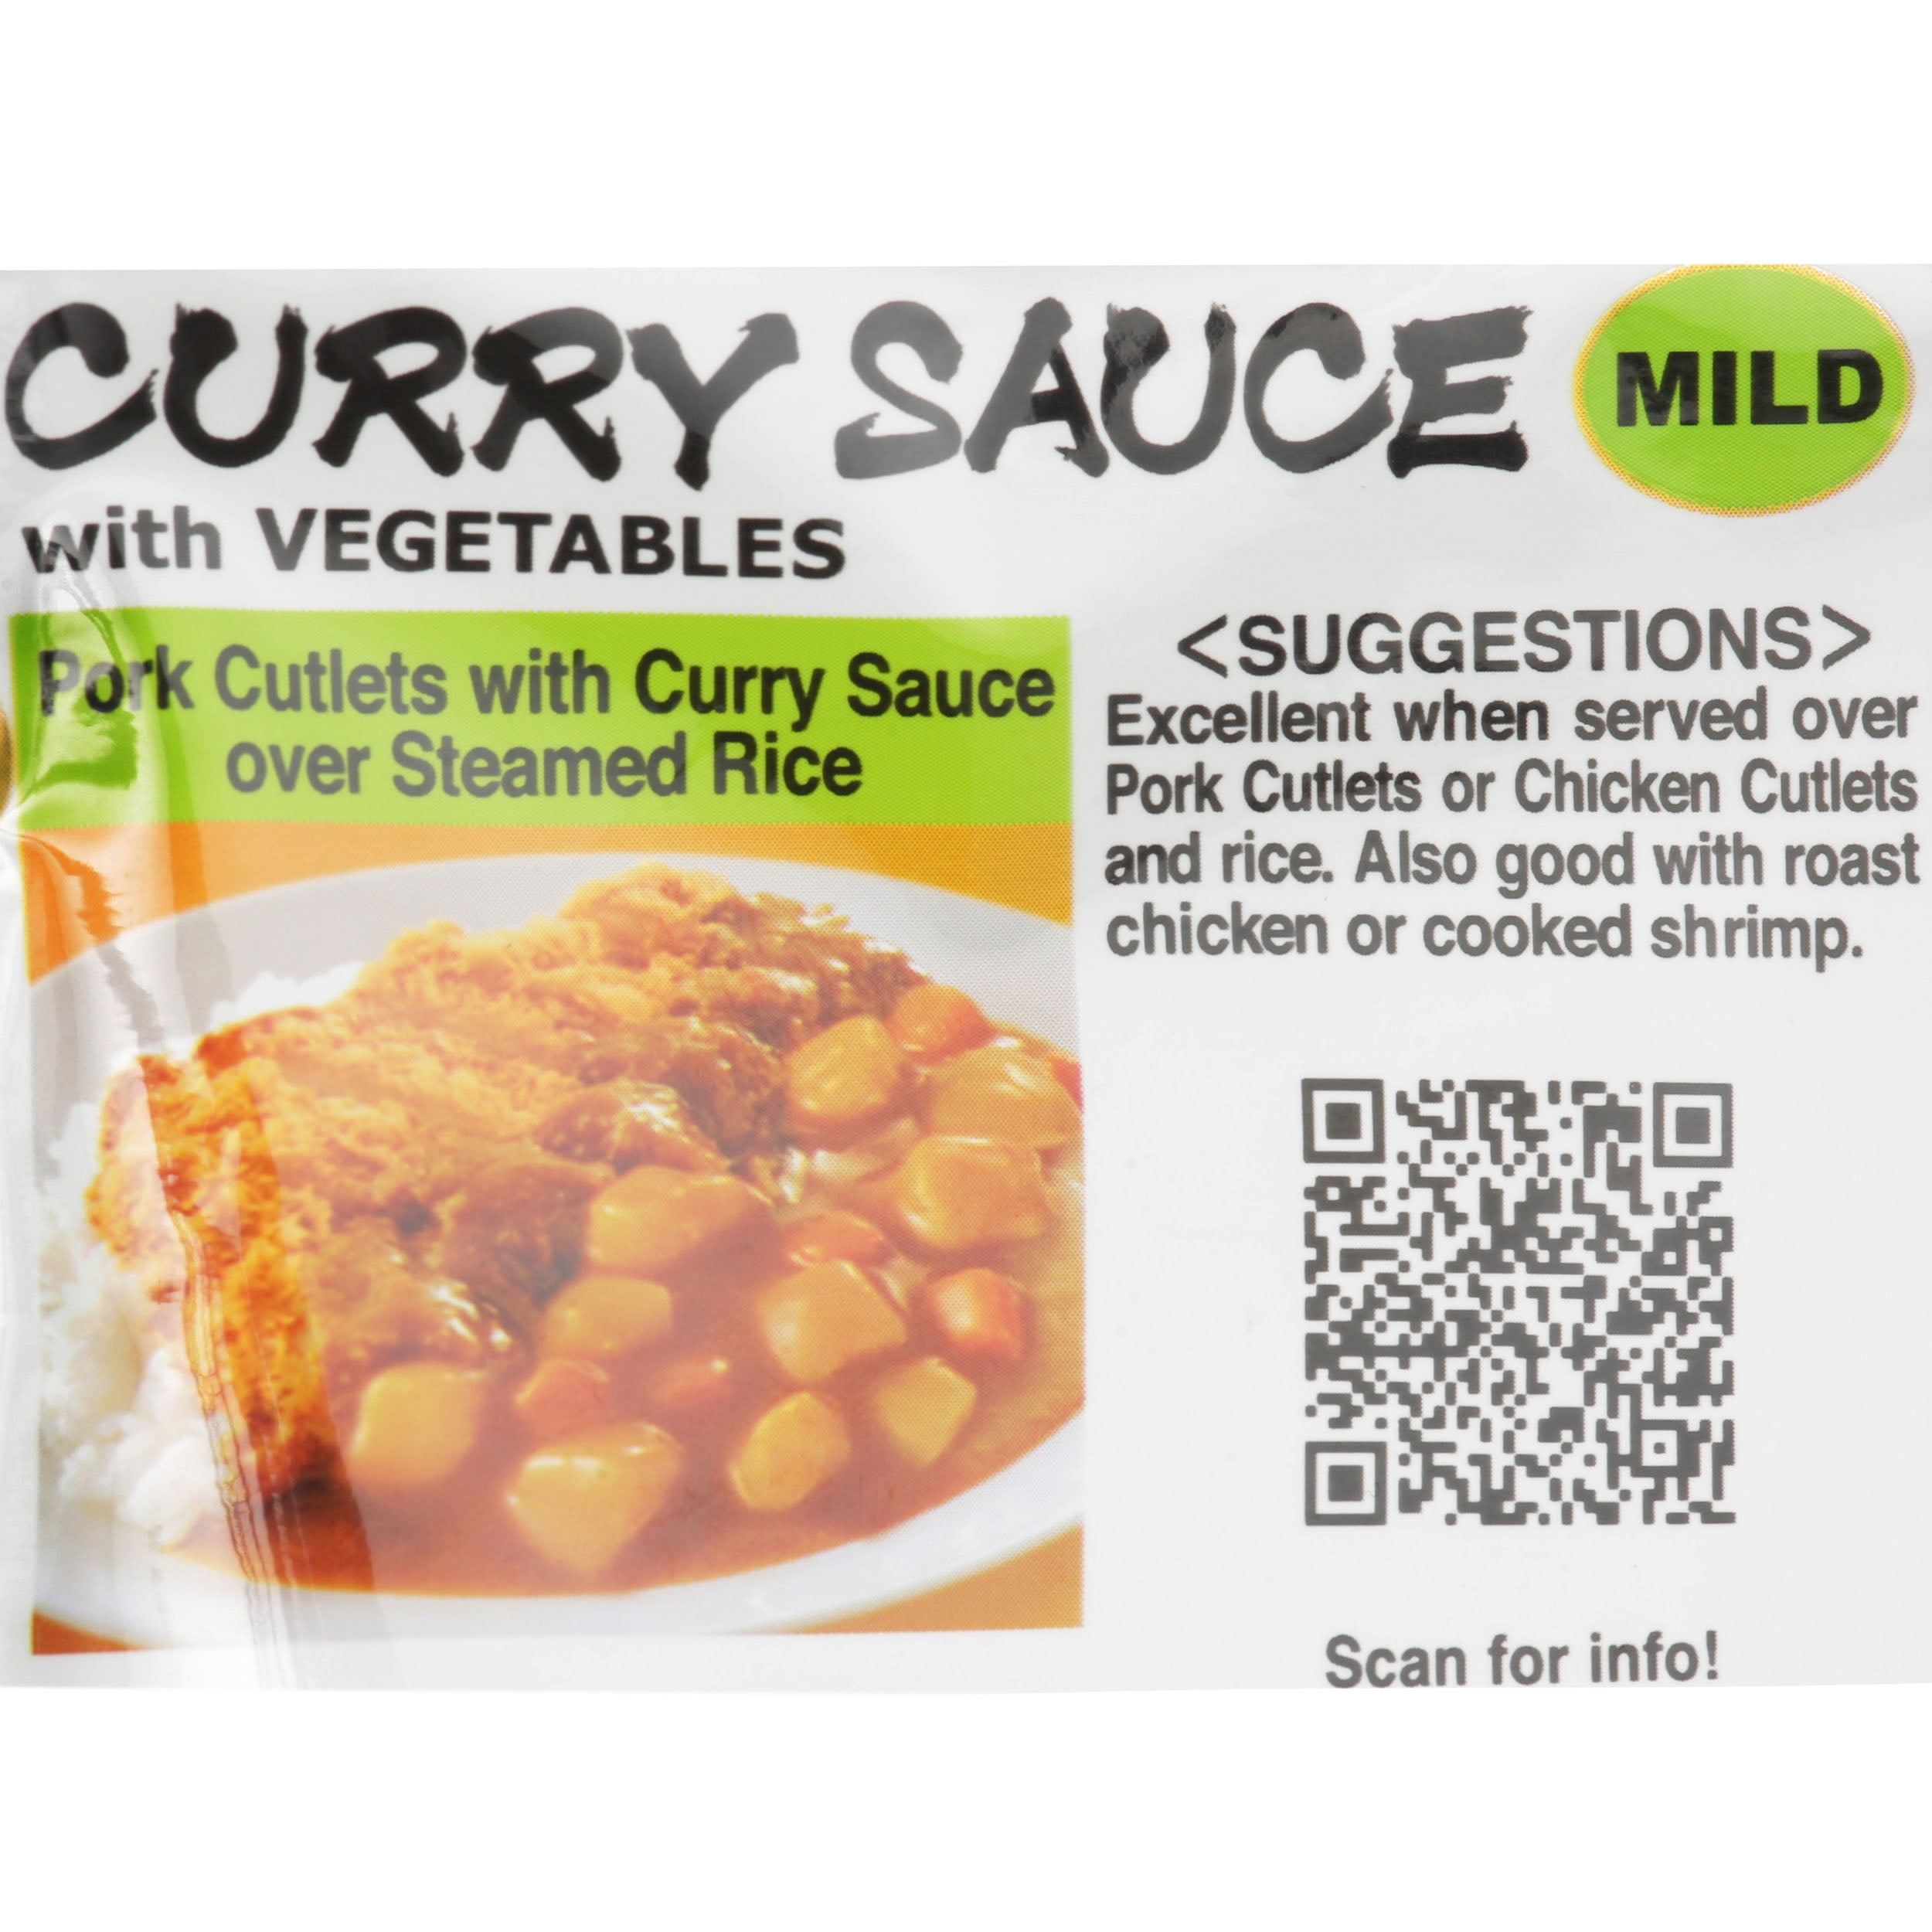 RETORT, Vegetables, with pack) Mil Style 7.4 Curry 5 Oz Japanese S&B Sauce